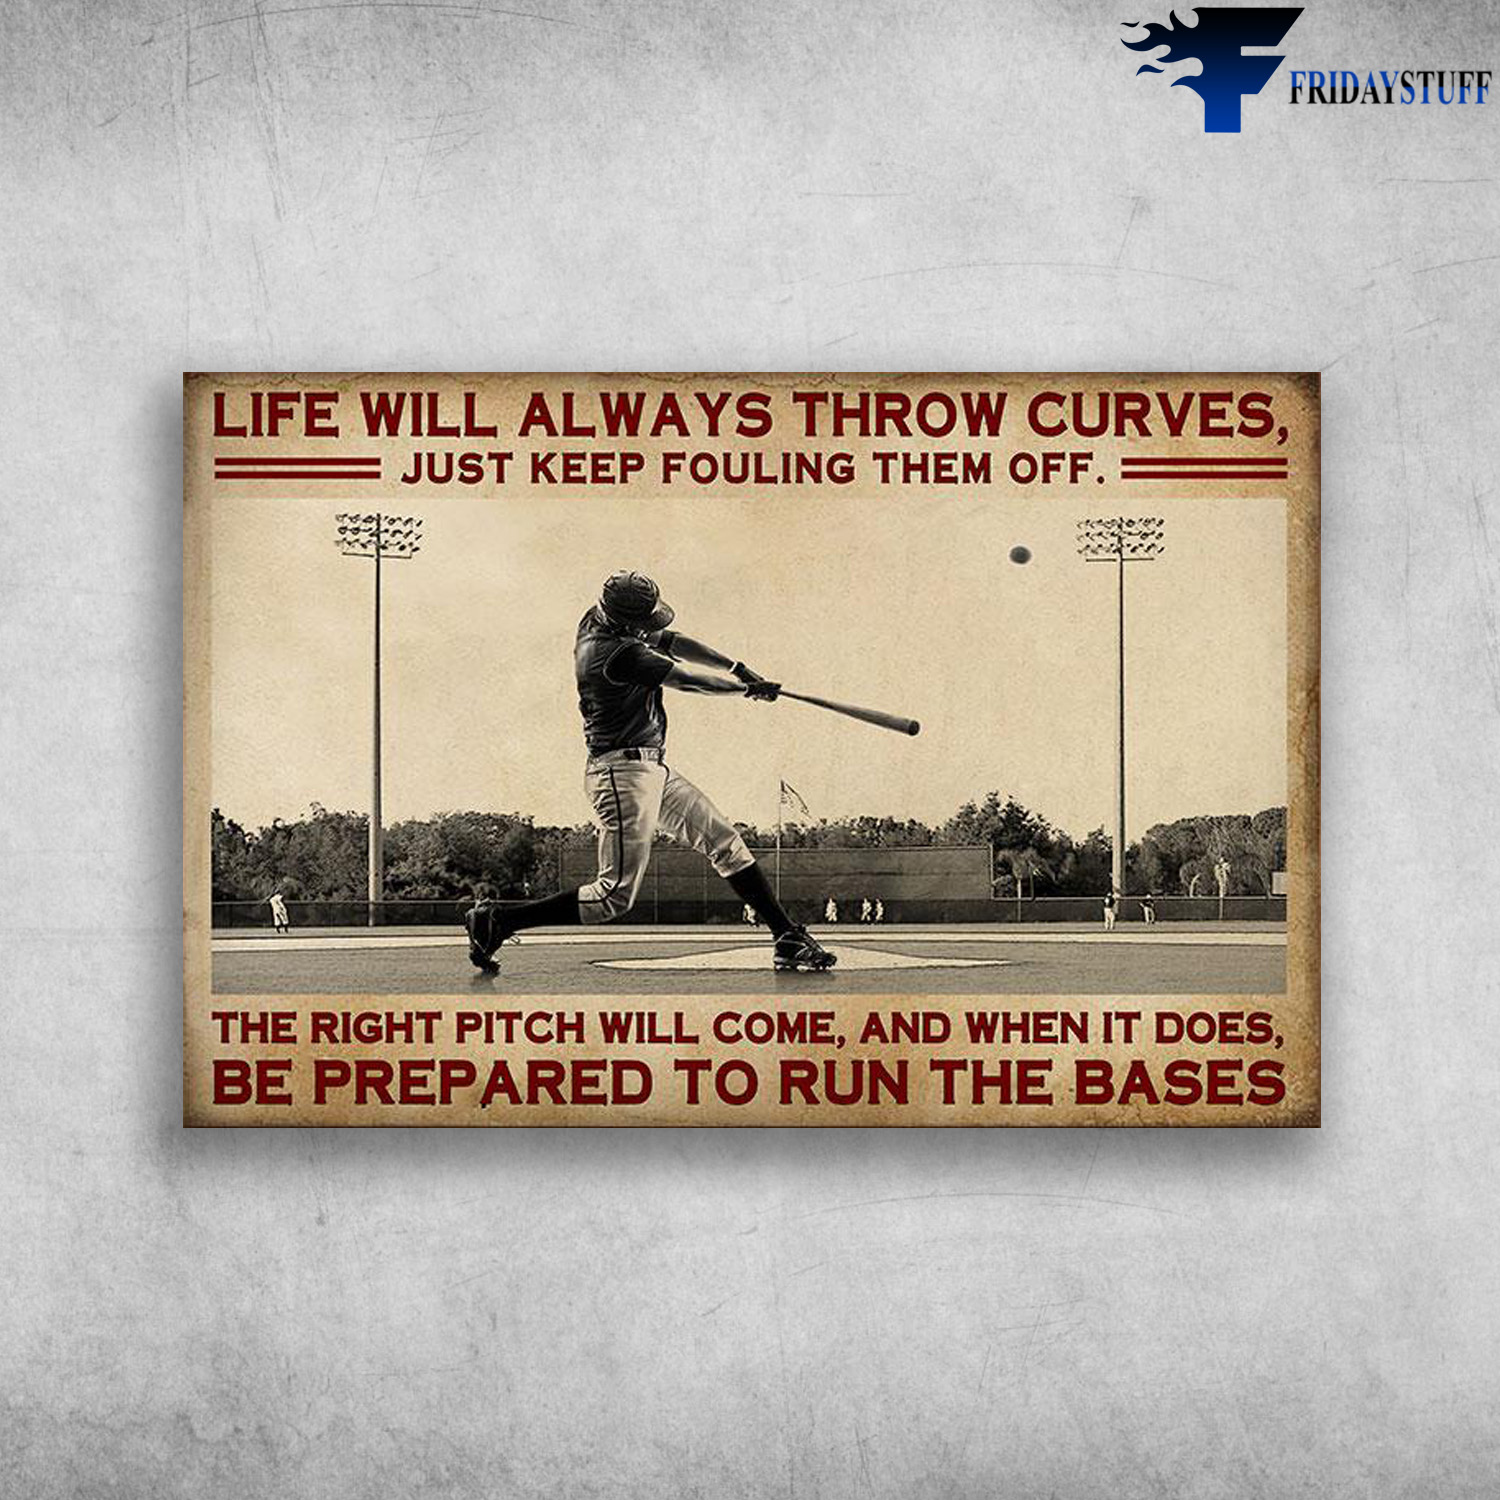 Man Playing Baseball - Life Will Always Throw Curves, Just Keep Fouling Them Off, The Right Pitch Will Come, And When It Does, Be Prepared To Run The Bases